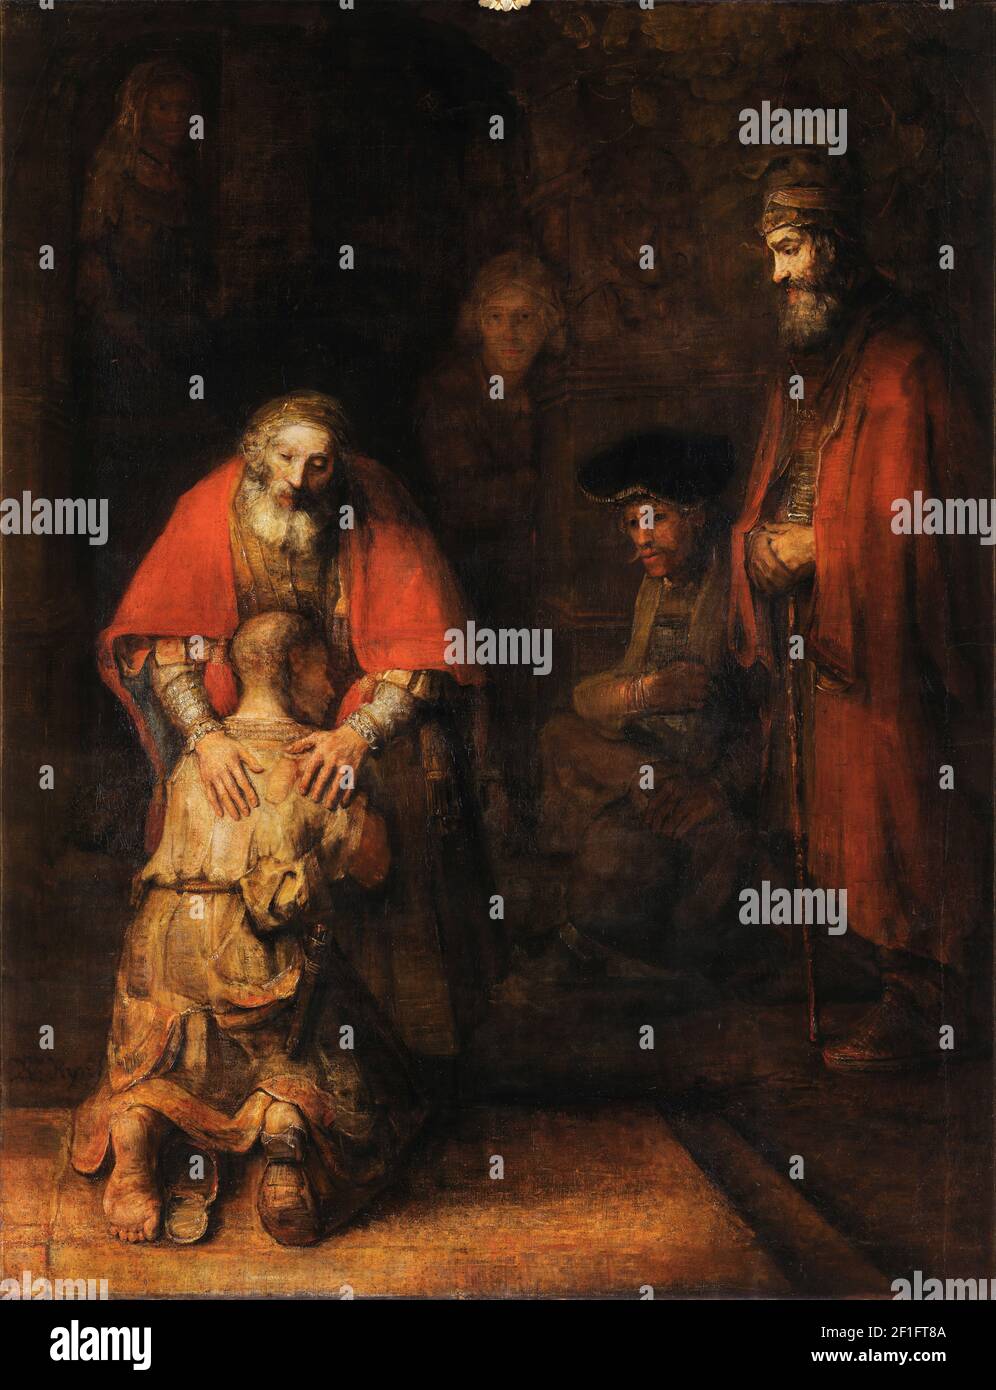 Rembrandt, Prodigal Son. Return of the Prodigal Son, painting by Rembrandt van Rijn (1606-1669), oil on canvas, c. 1663-5 Stock Photo